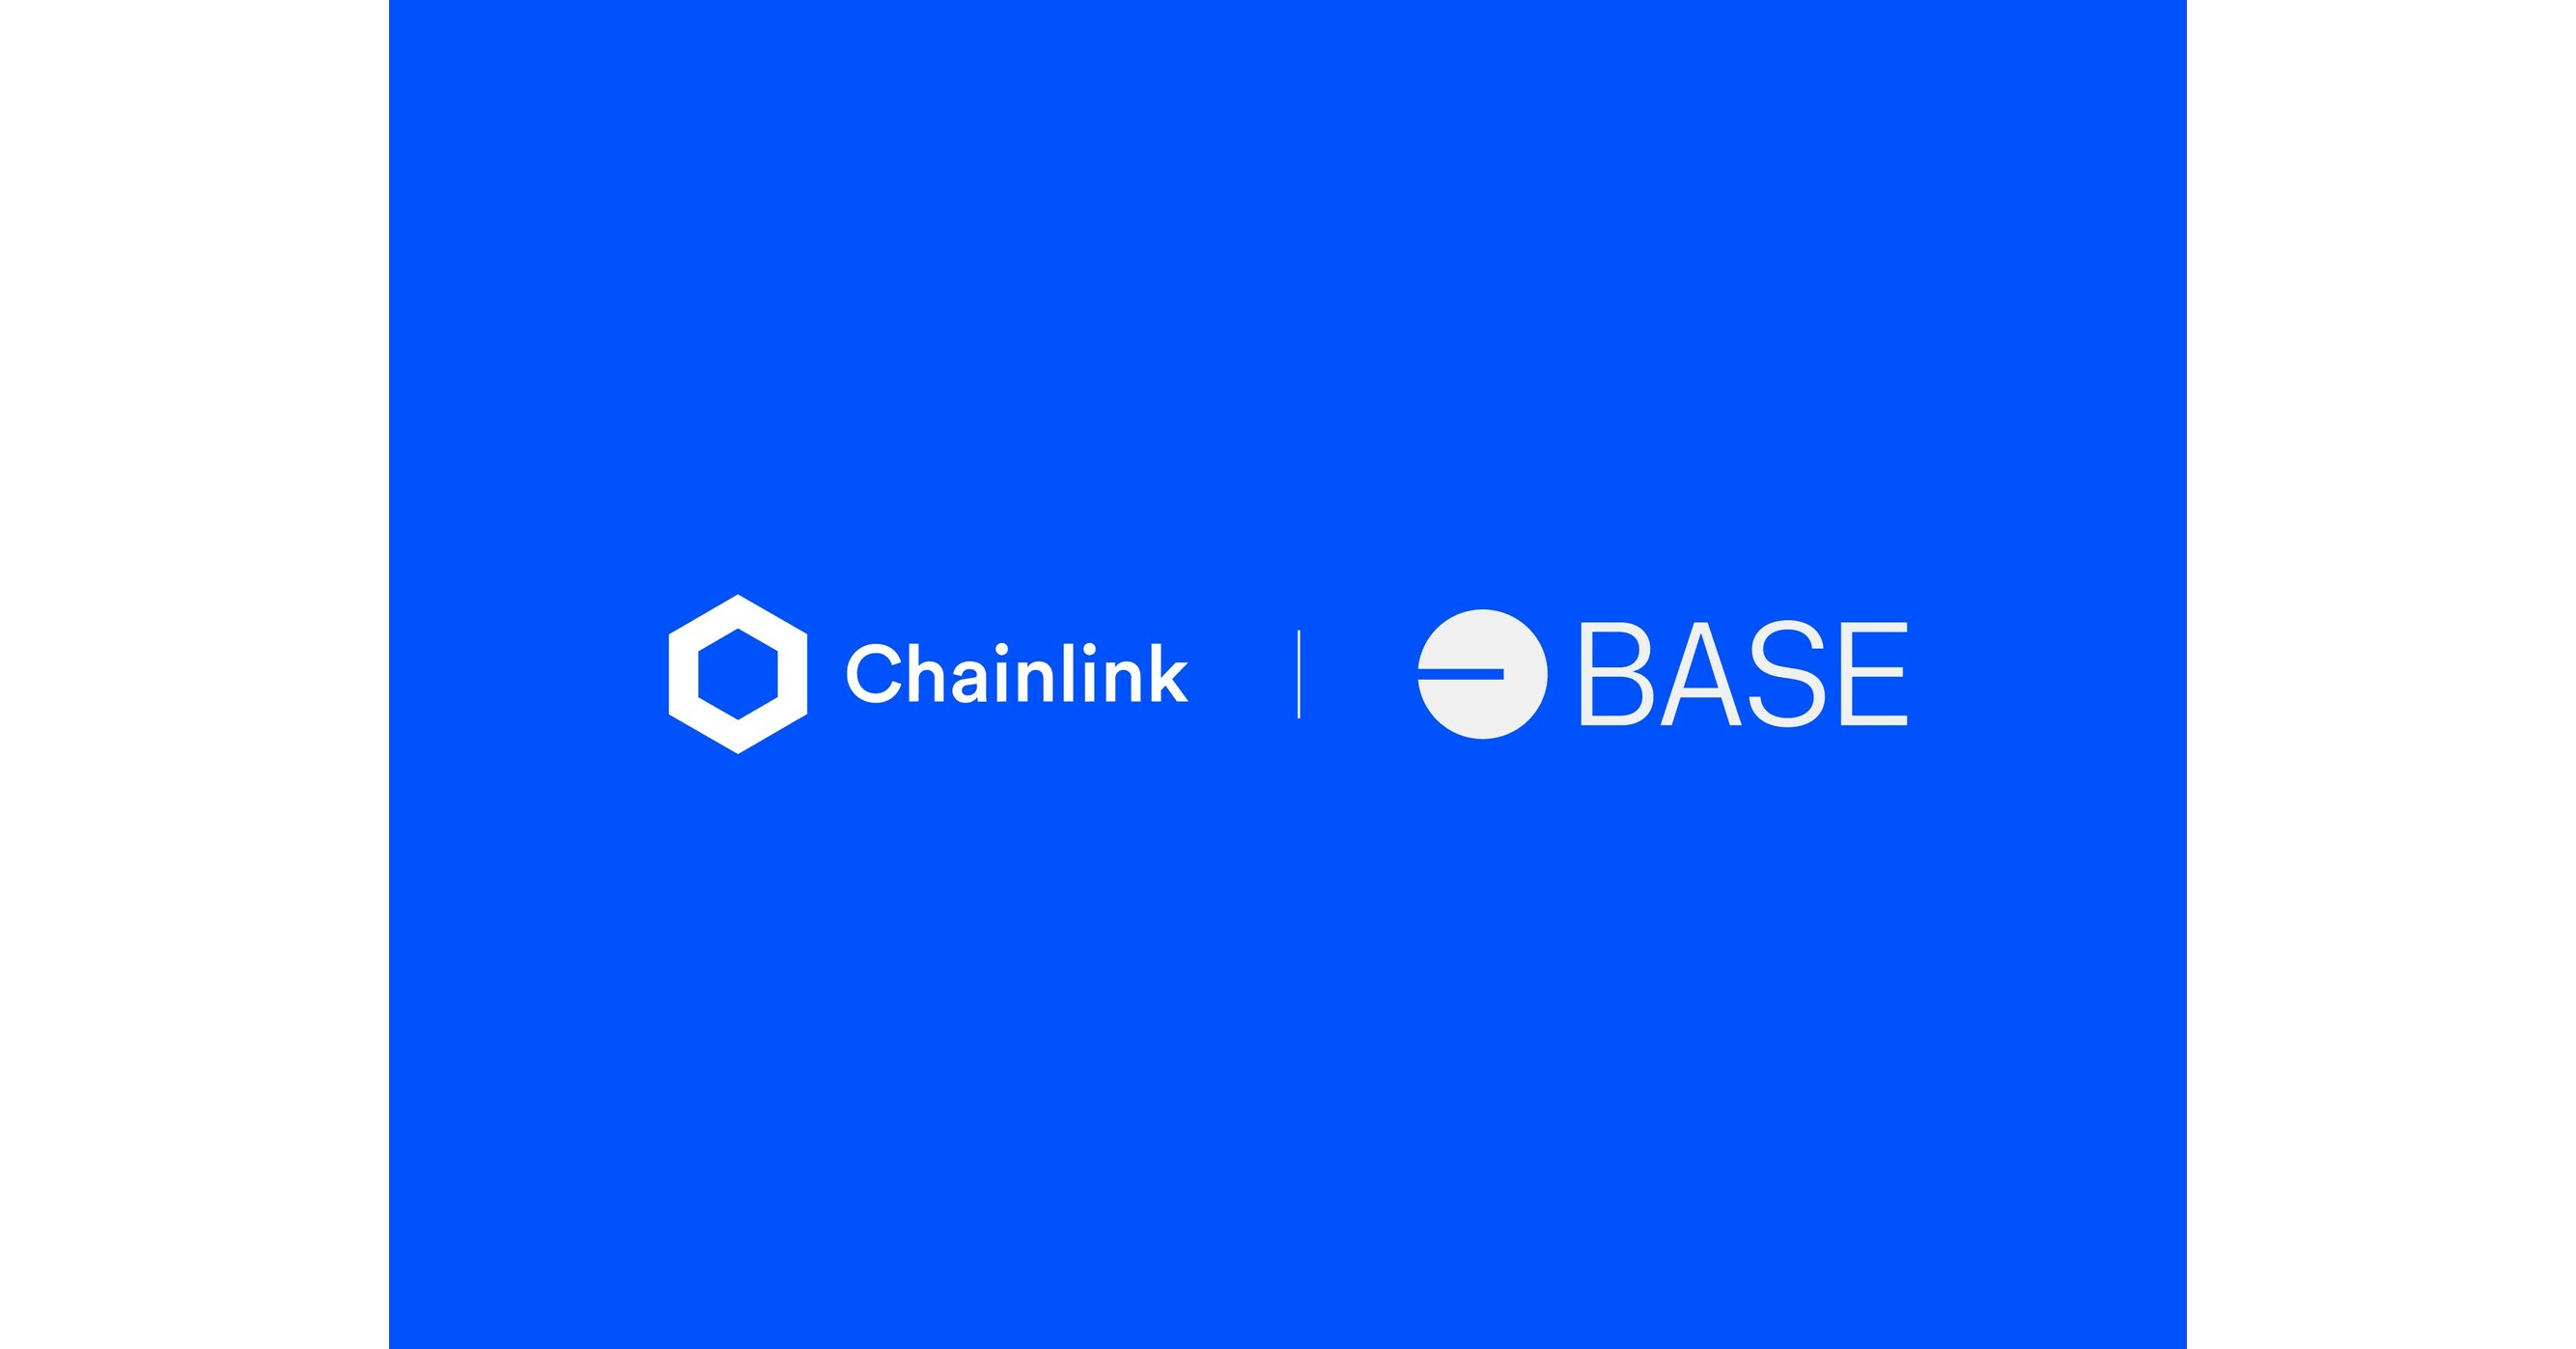 chainlink-price-feeds-are-now-live-on-base-to-unlock-secure-defi-ecosystem-growth